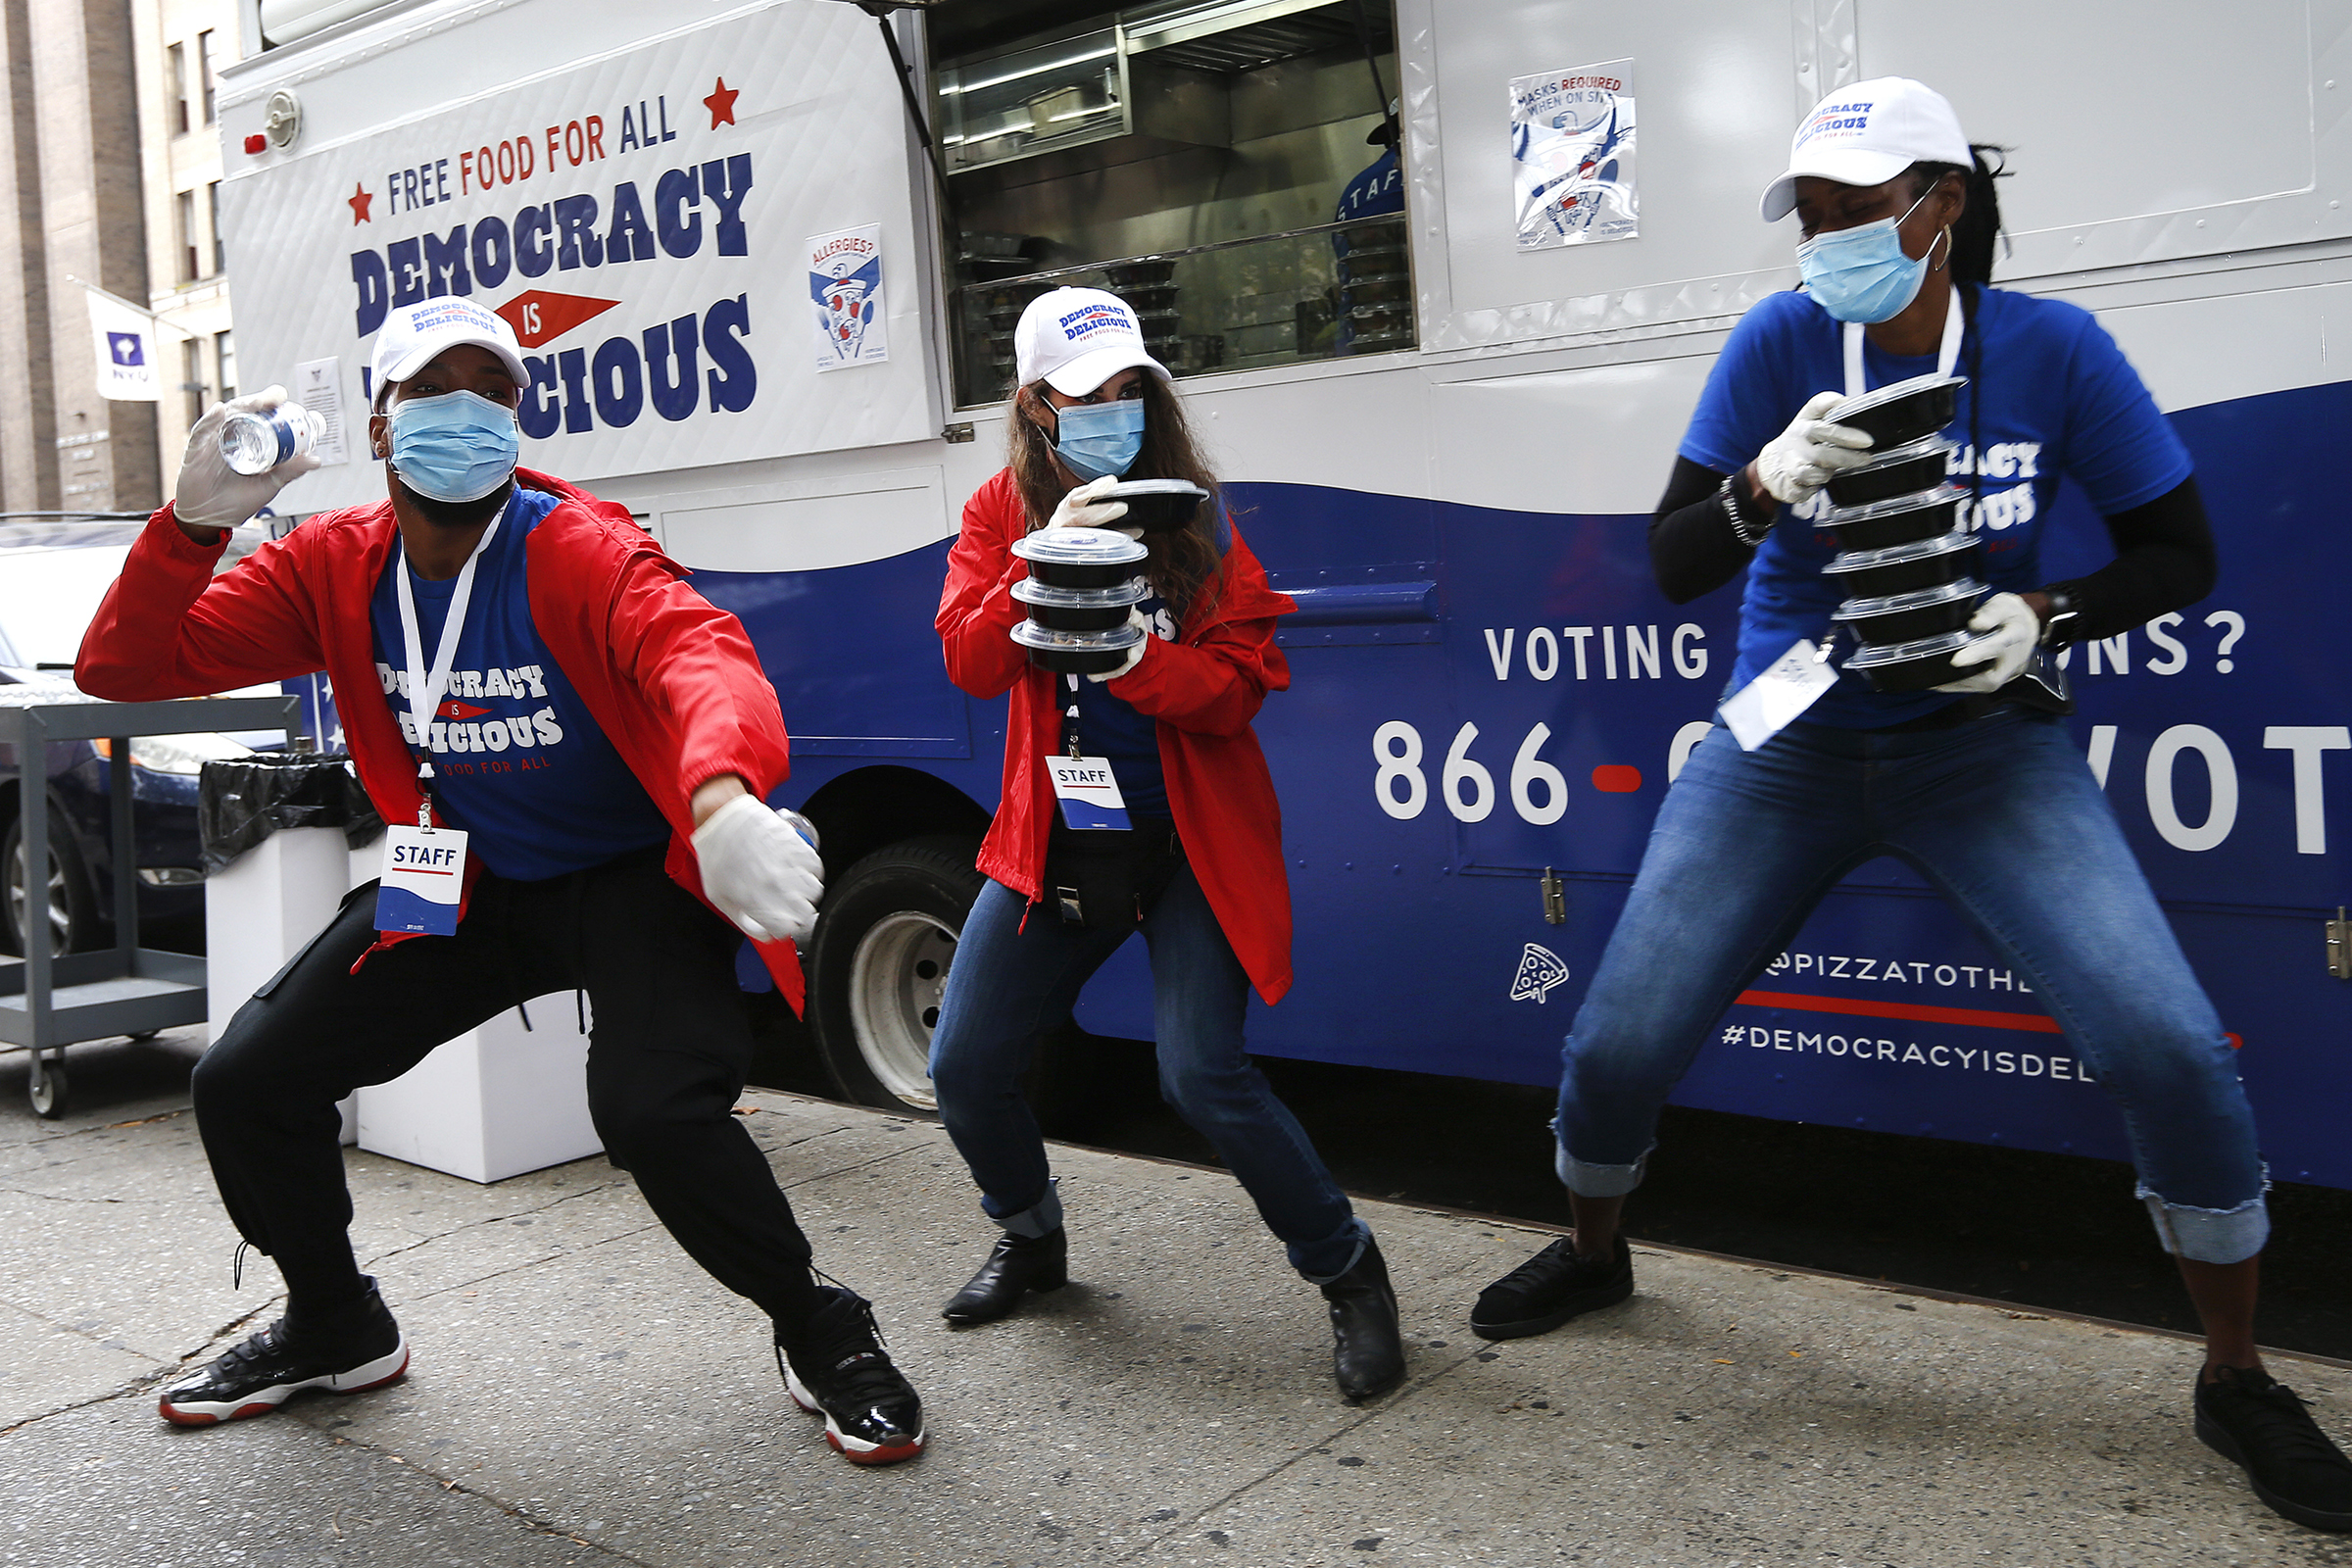 Pizza to the Polls food truck staff dance and spread good energy to voters waiting in line on early voting day in New York, on Oct. 24, 2020. (Jason DeCrow—AP/Pizza to the Polls)